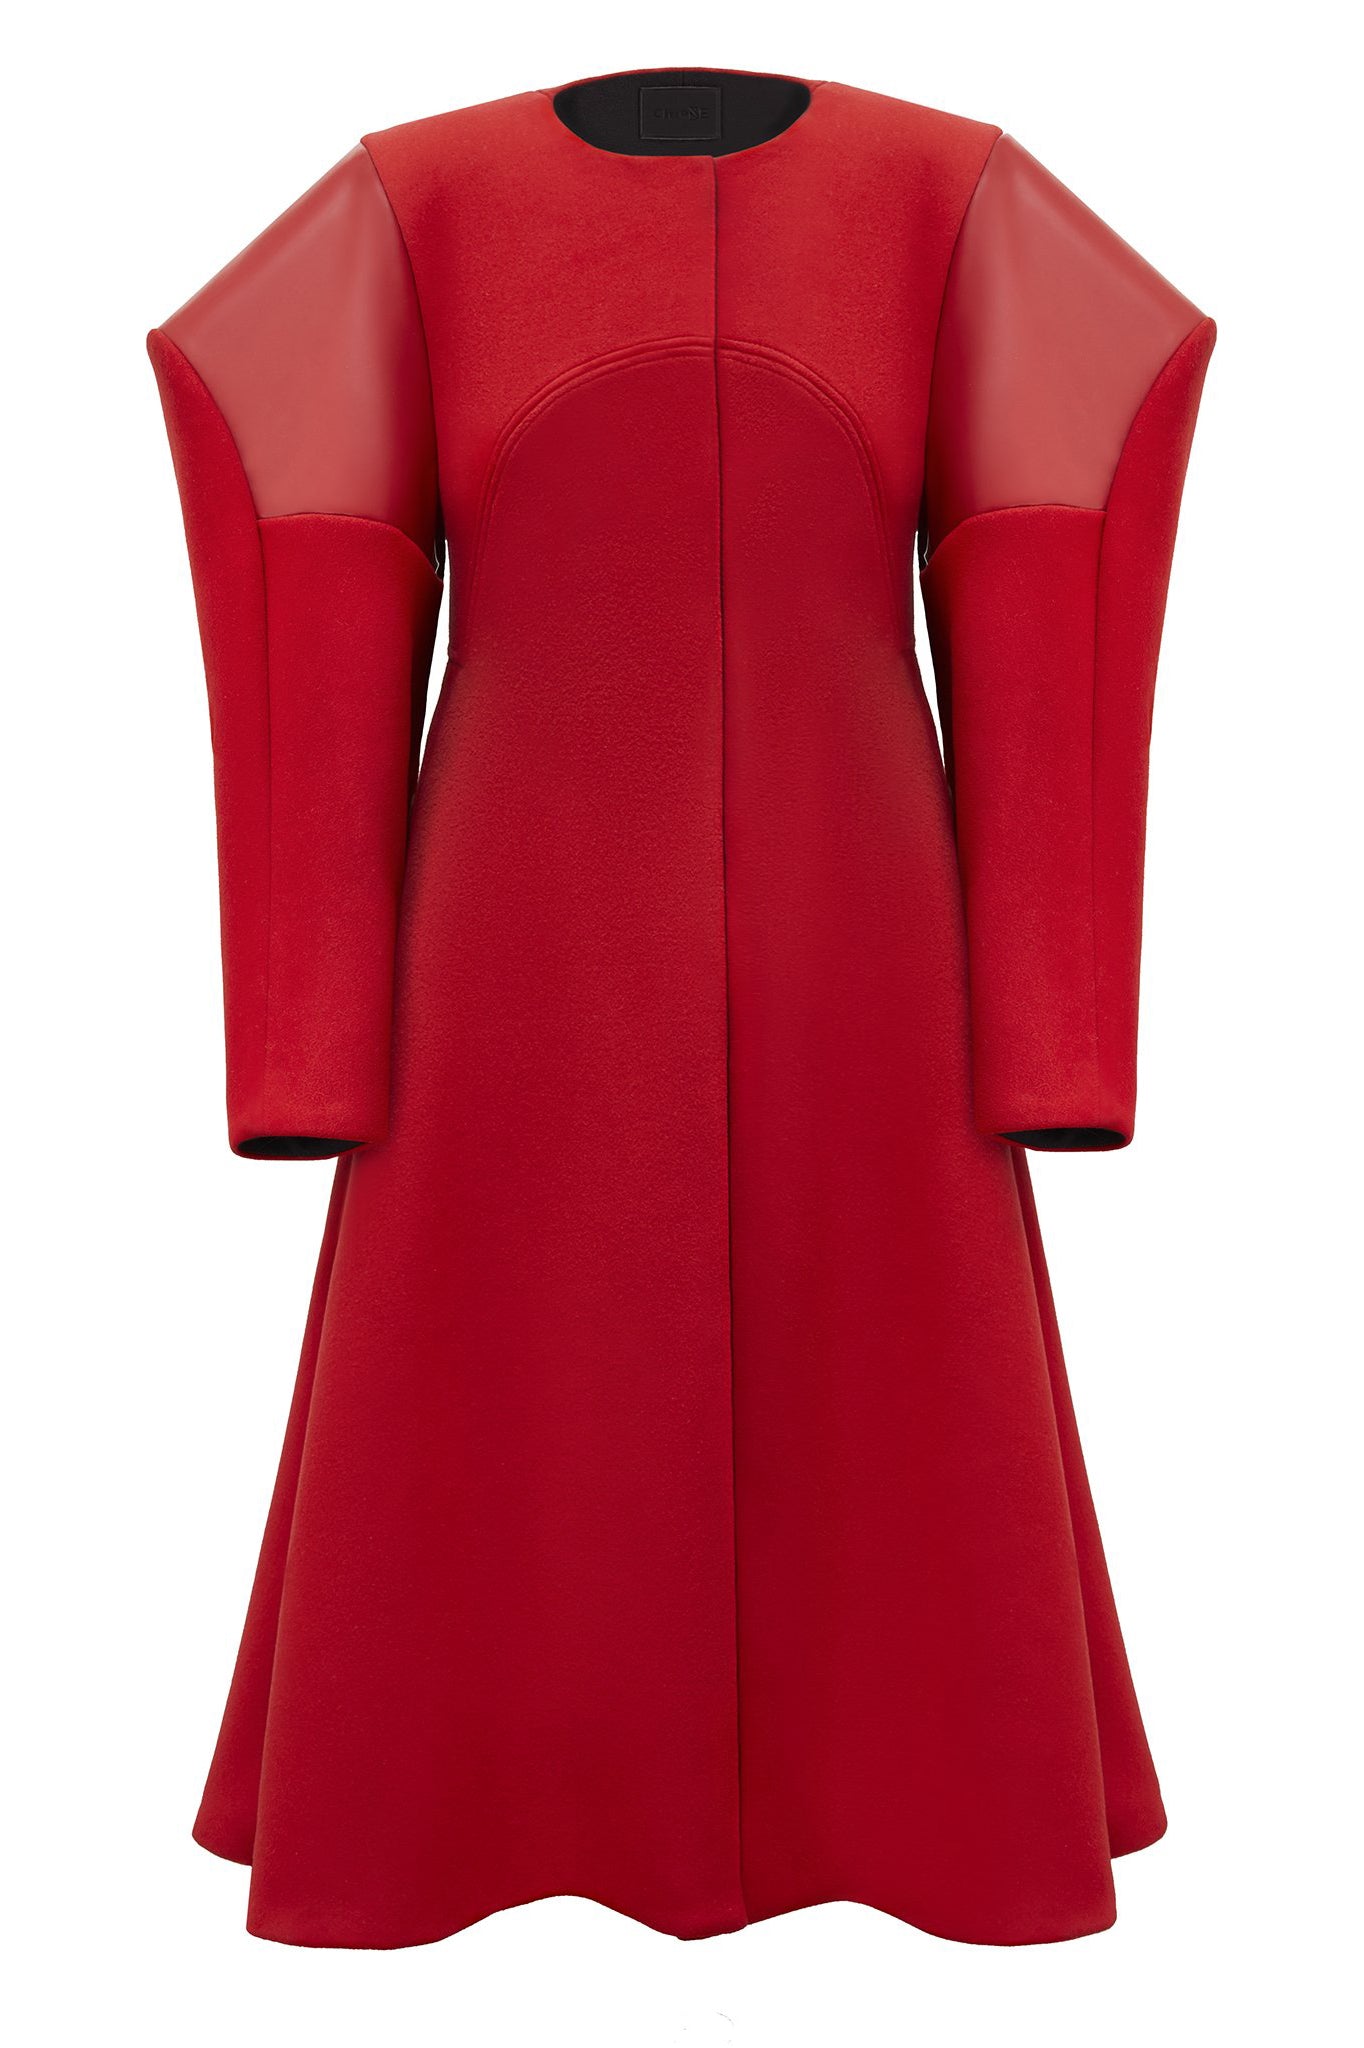 Red Wool and Latex "Broad" Coat